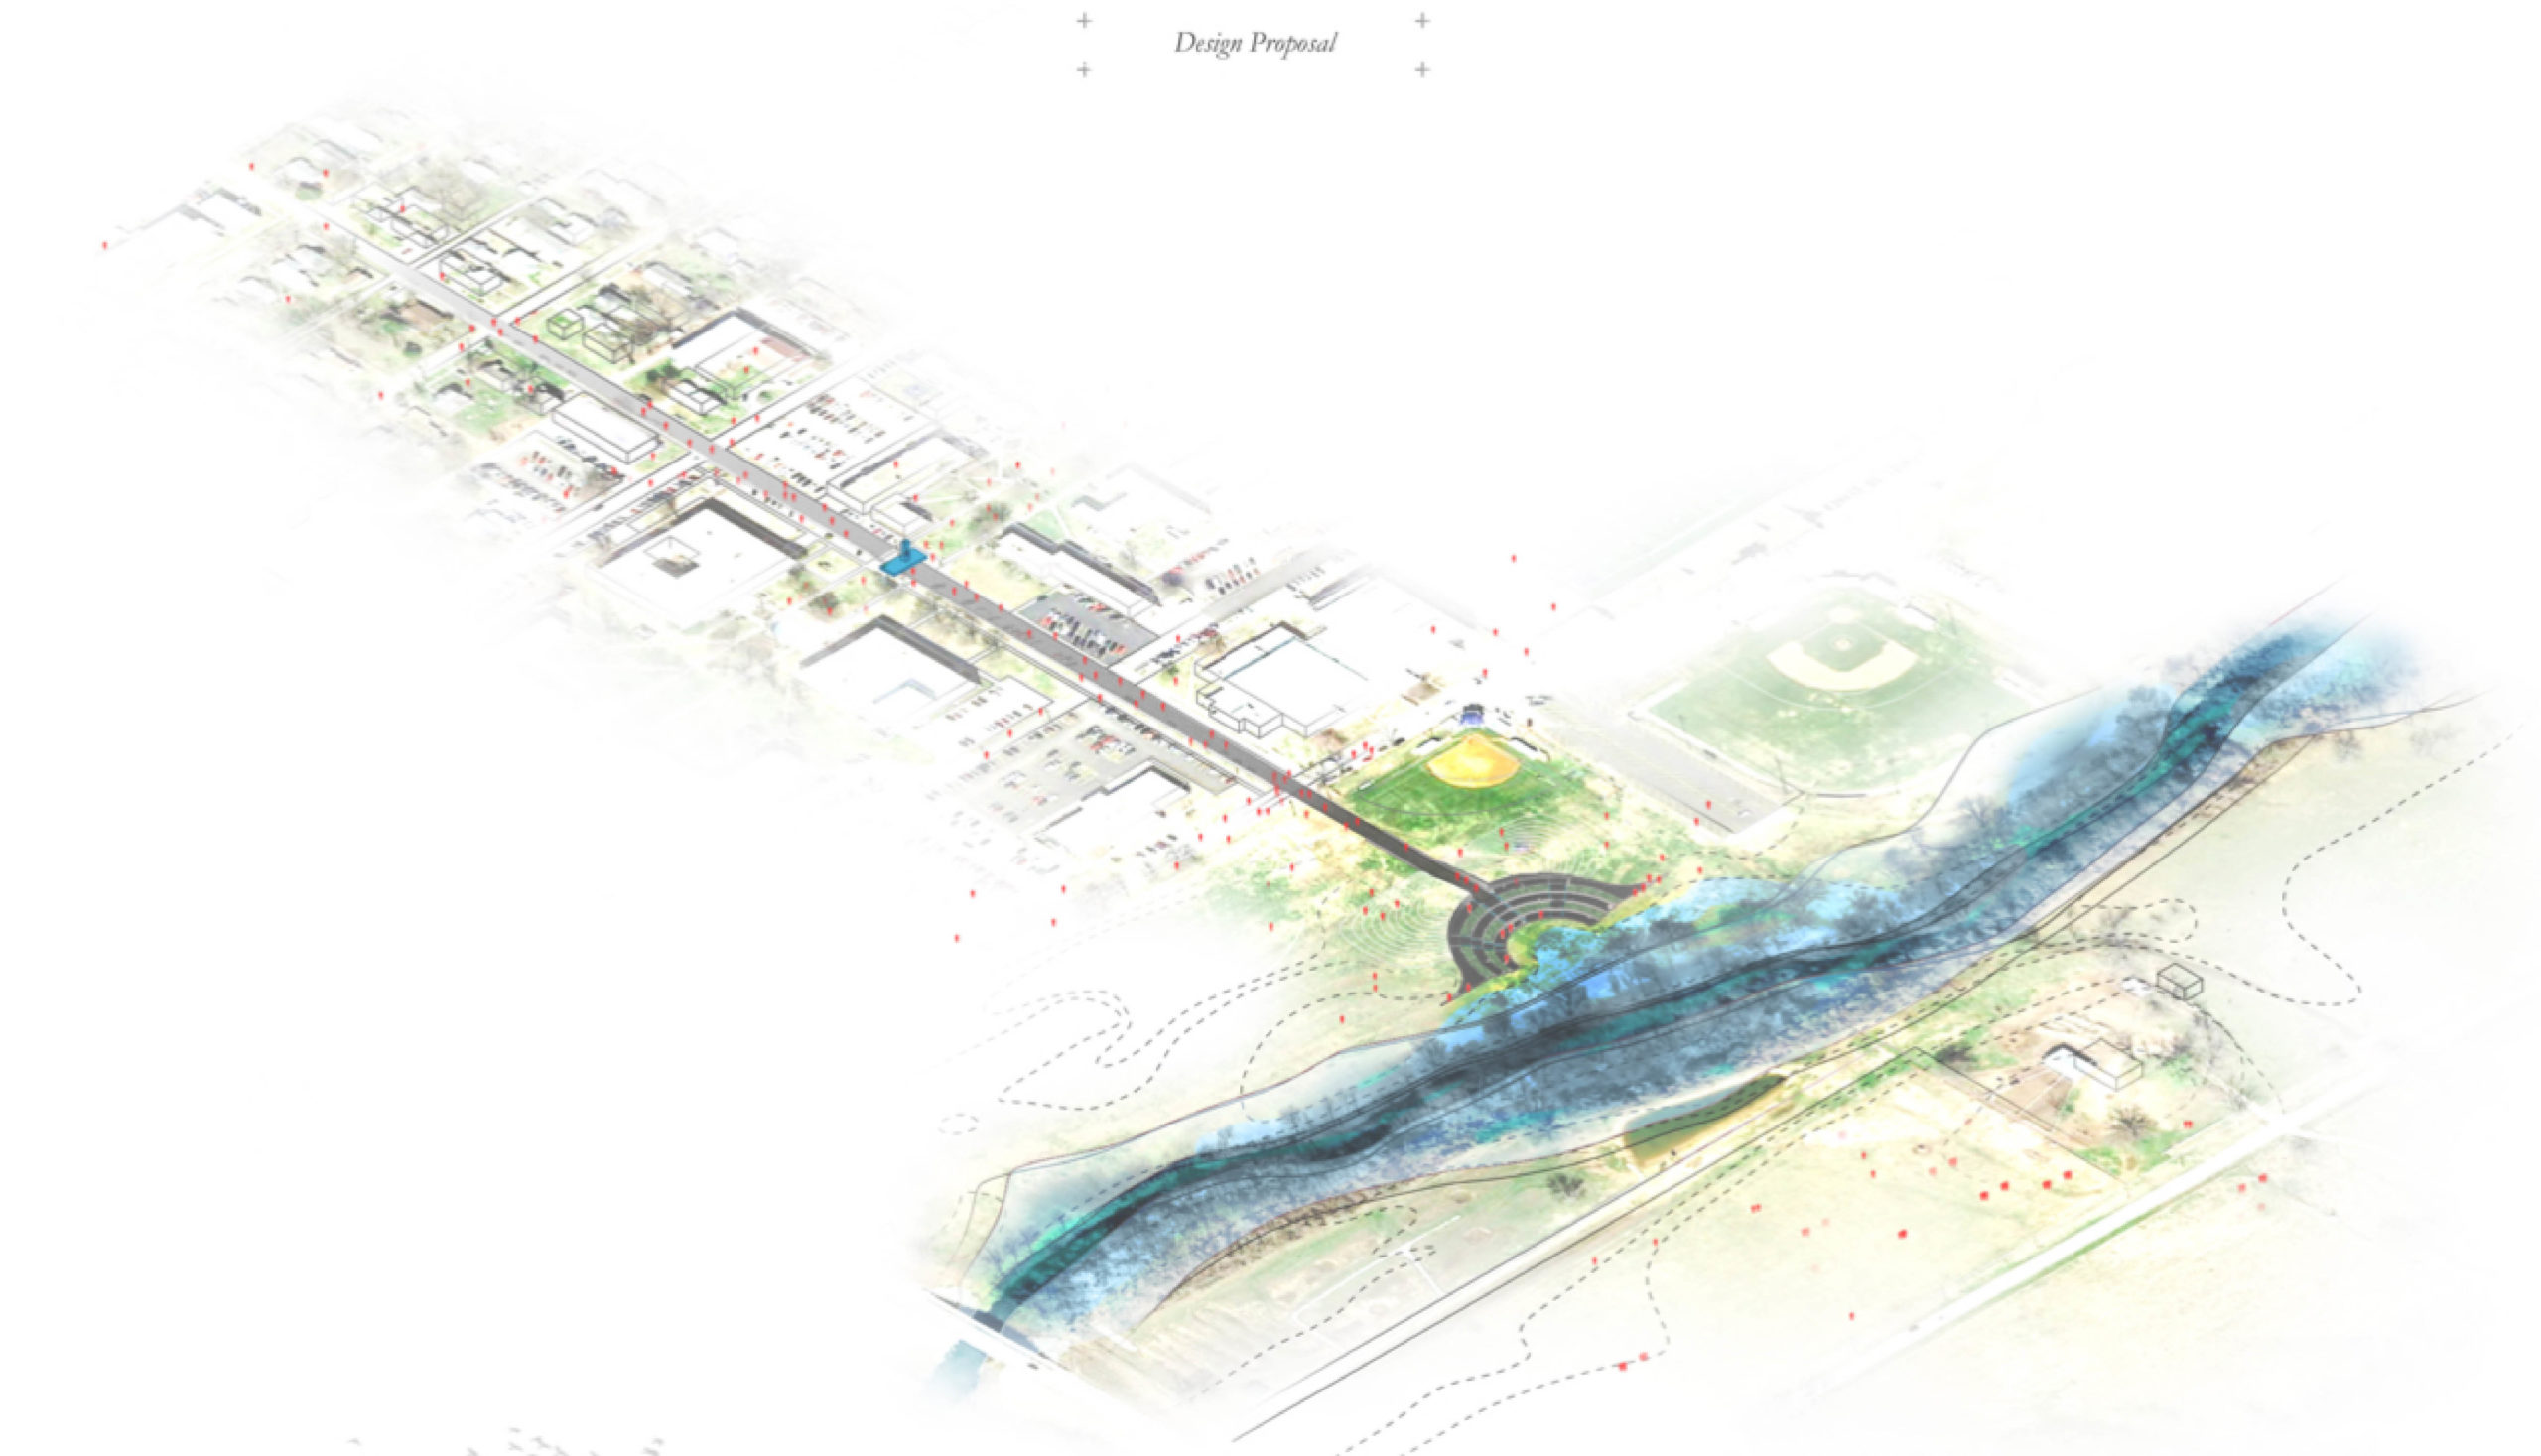 Final proposal by Hao Holly Wang for the Option Studio Tar Creek Remade